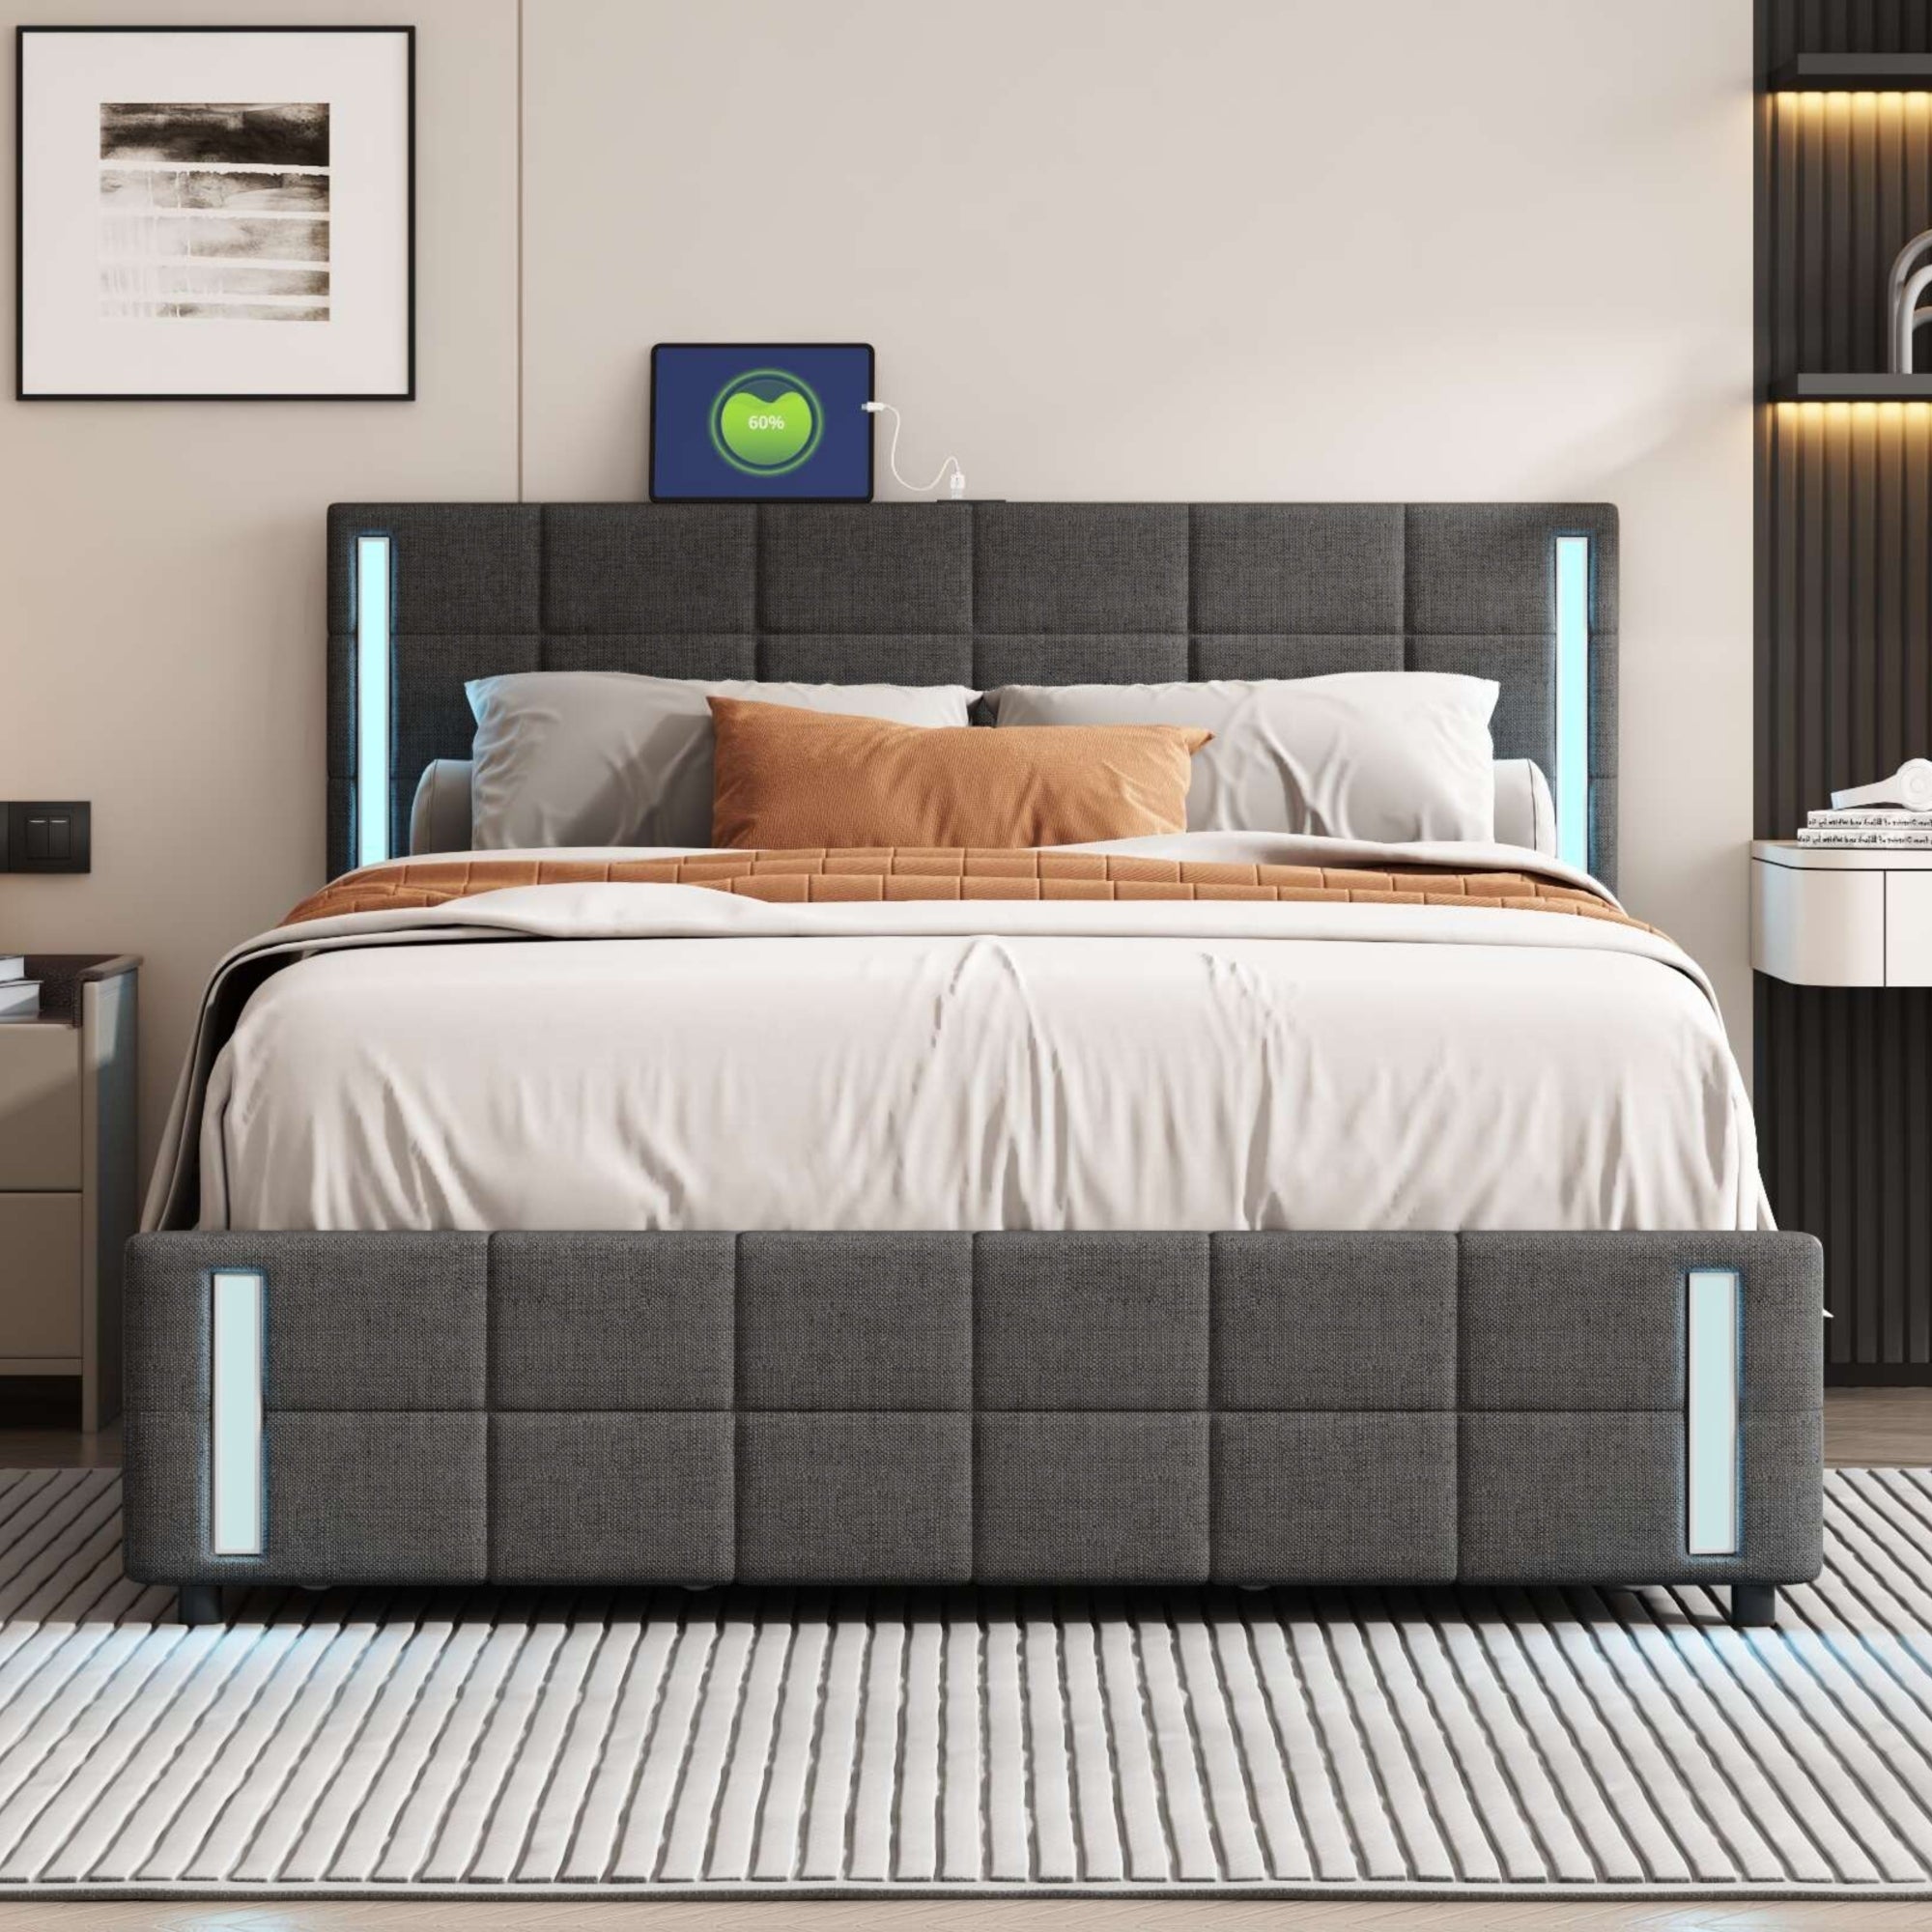 Queen Size Upholstered Platform Bed with LED Lights and USB Charging, Storage Bed with 4 Drawers, Dark Gray